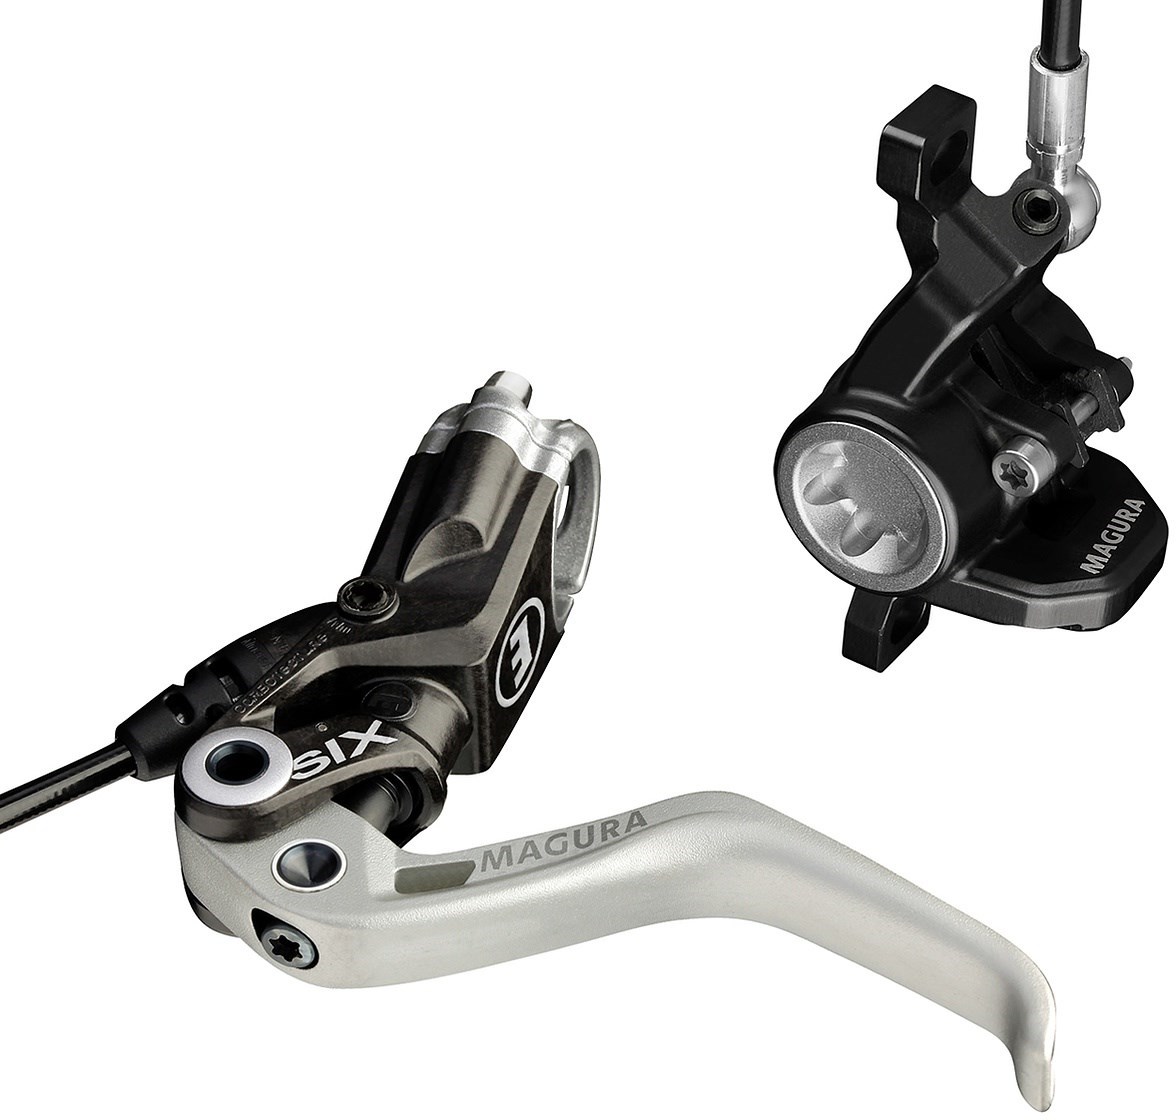 Magura MT6 Disc Brake With Storm SL Rotor product image